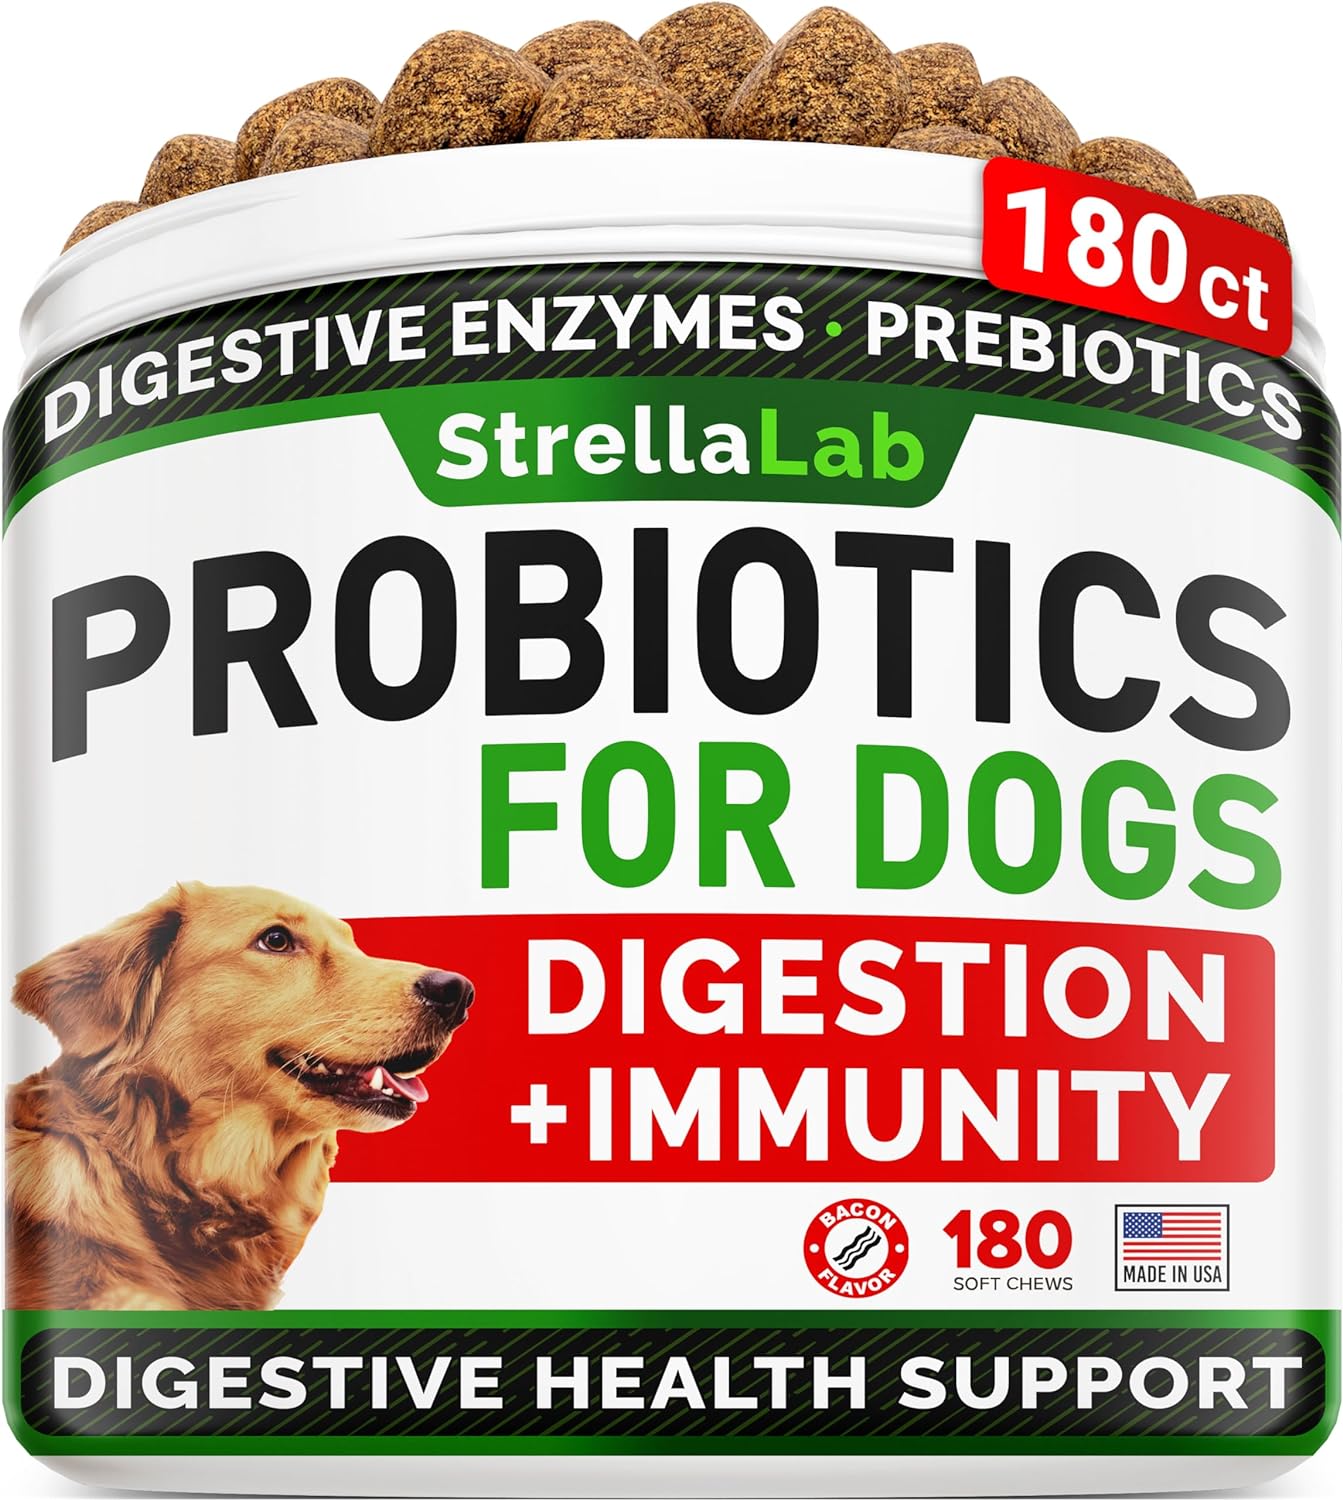 Dog Probiotics Treats for Picky Eaters - Digestive Enzymes + Prebiotics - Chewable Fiber Supplement - Allergy, Diarrhea, Gas, Constipation, Upset Stomach Relief - Improve Digestion&Immunity